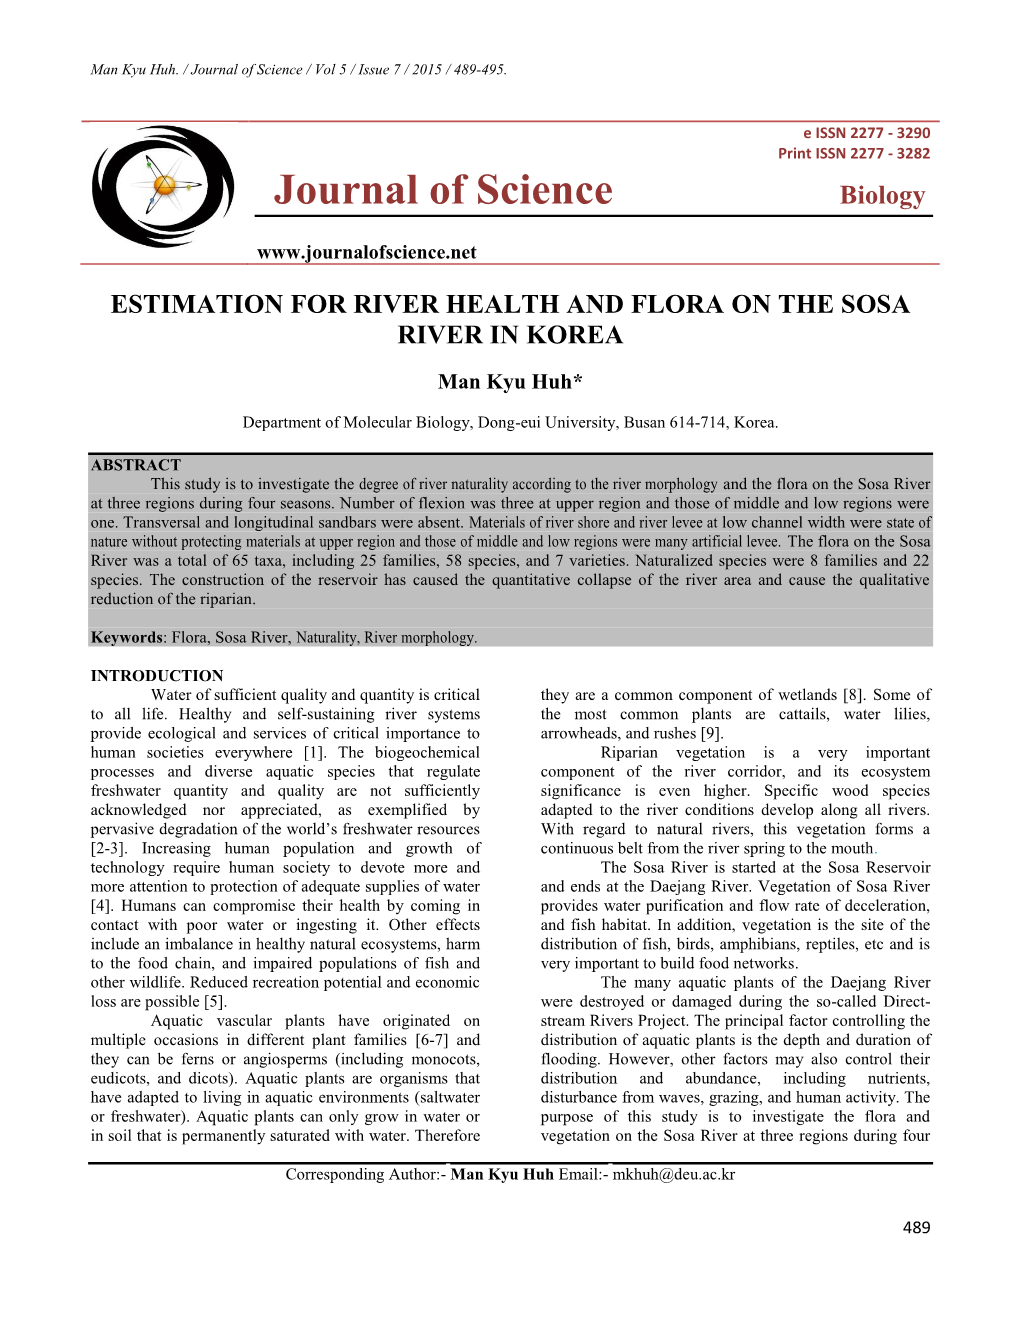 Journal of Science / Vol 5 / Issue 7 / 2015 / 489-495